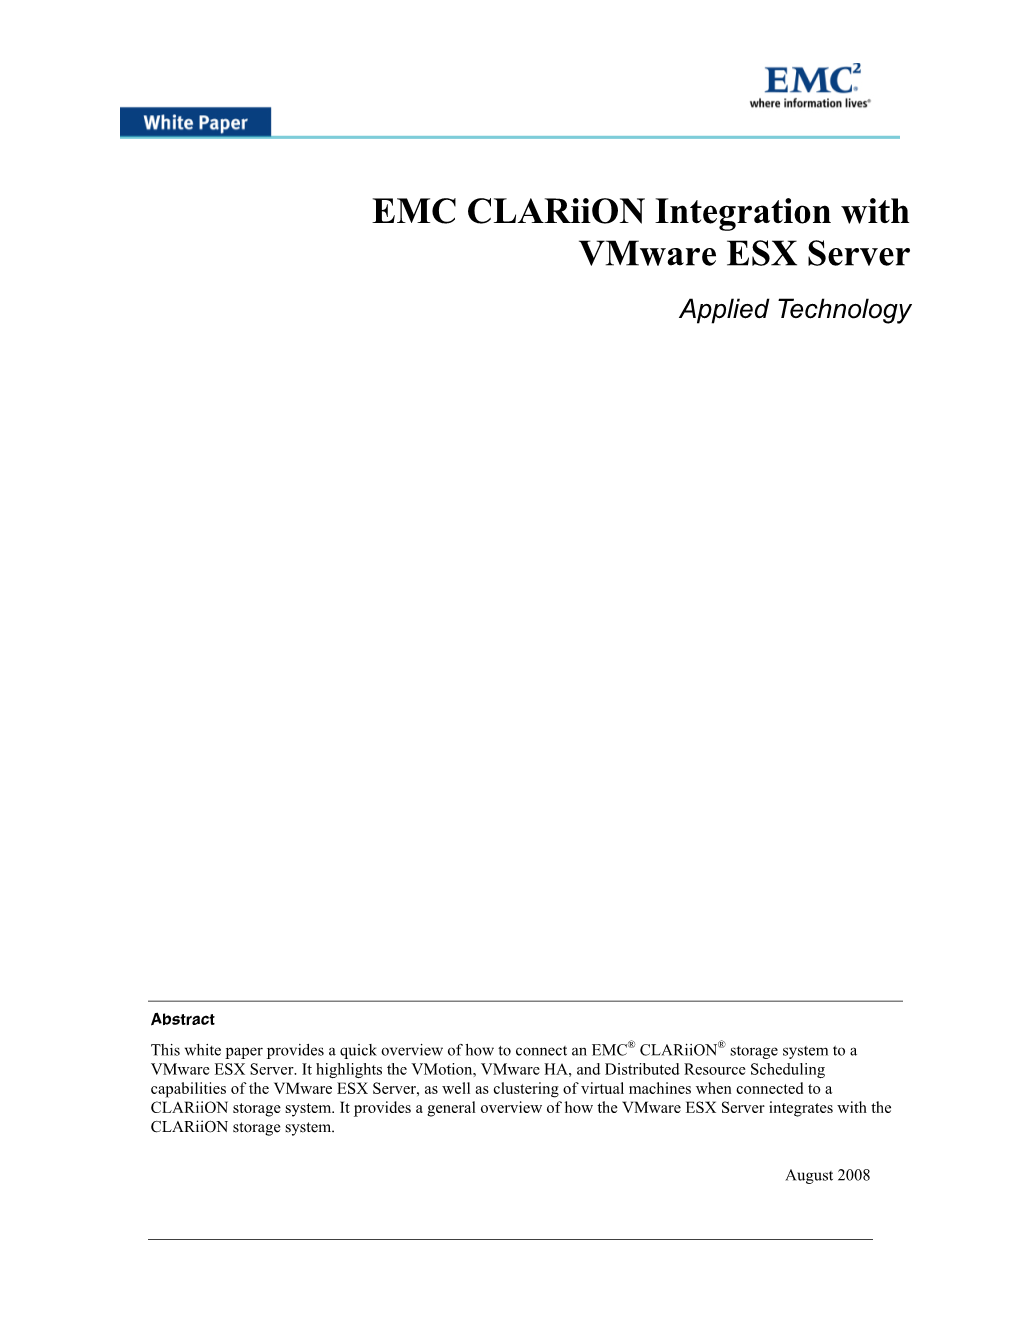 EMC Clariion Integration with Vmware ESX Server Applied Technology